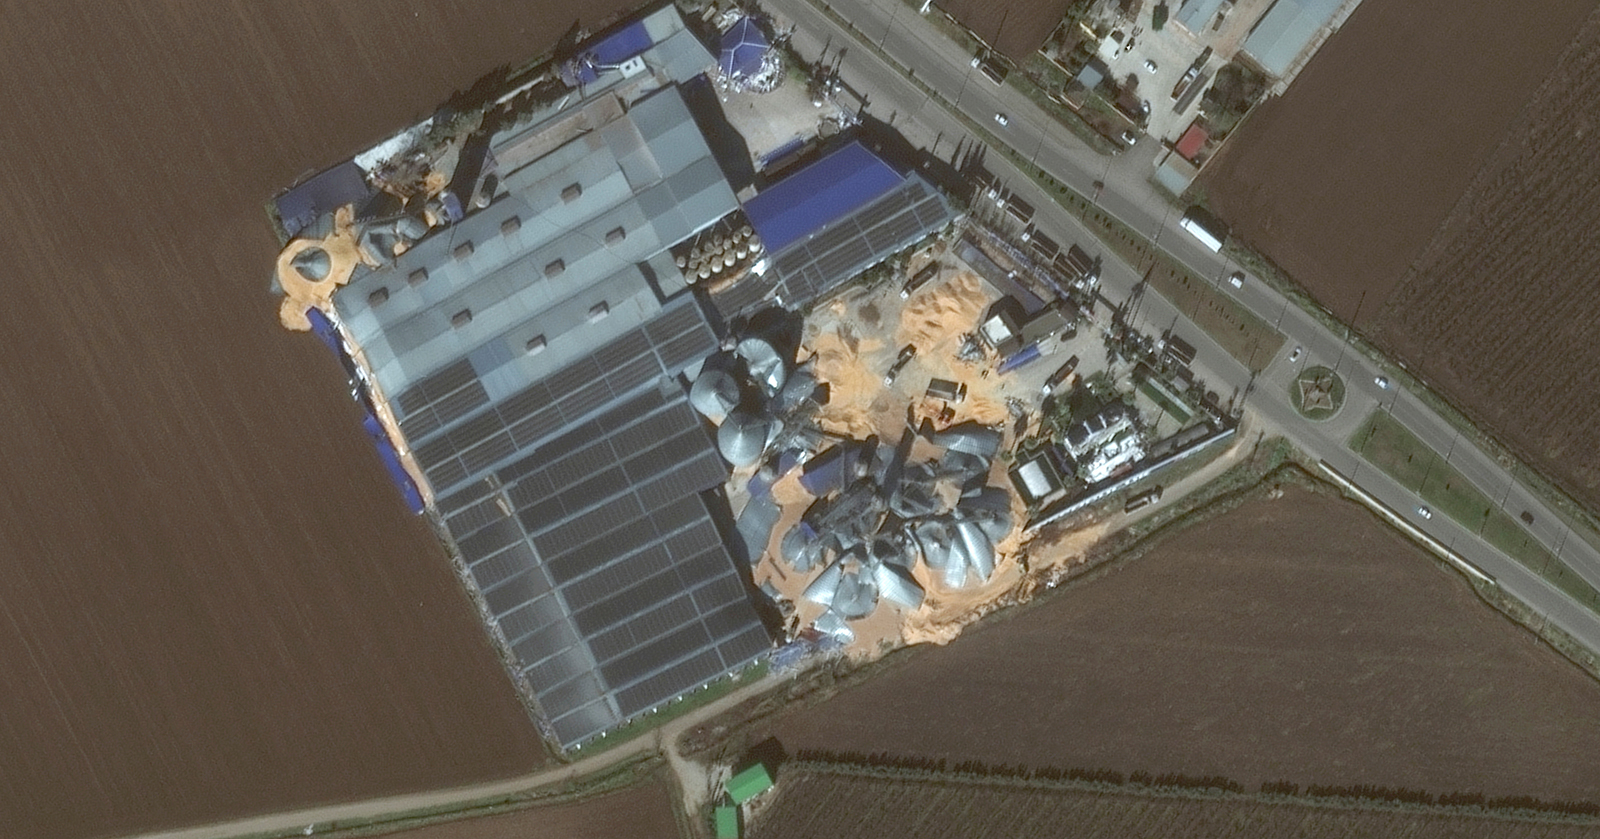 A satellite image shows grain silos destroyed after an earthquake in Kirikhan, Turkey, on February 9.